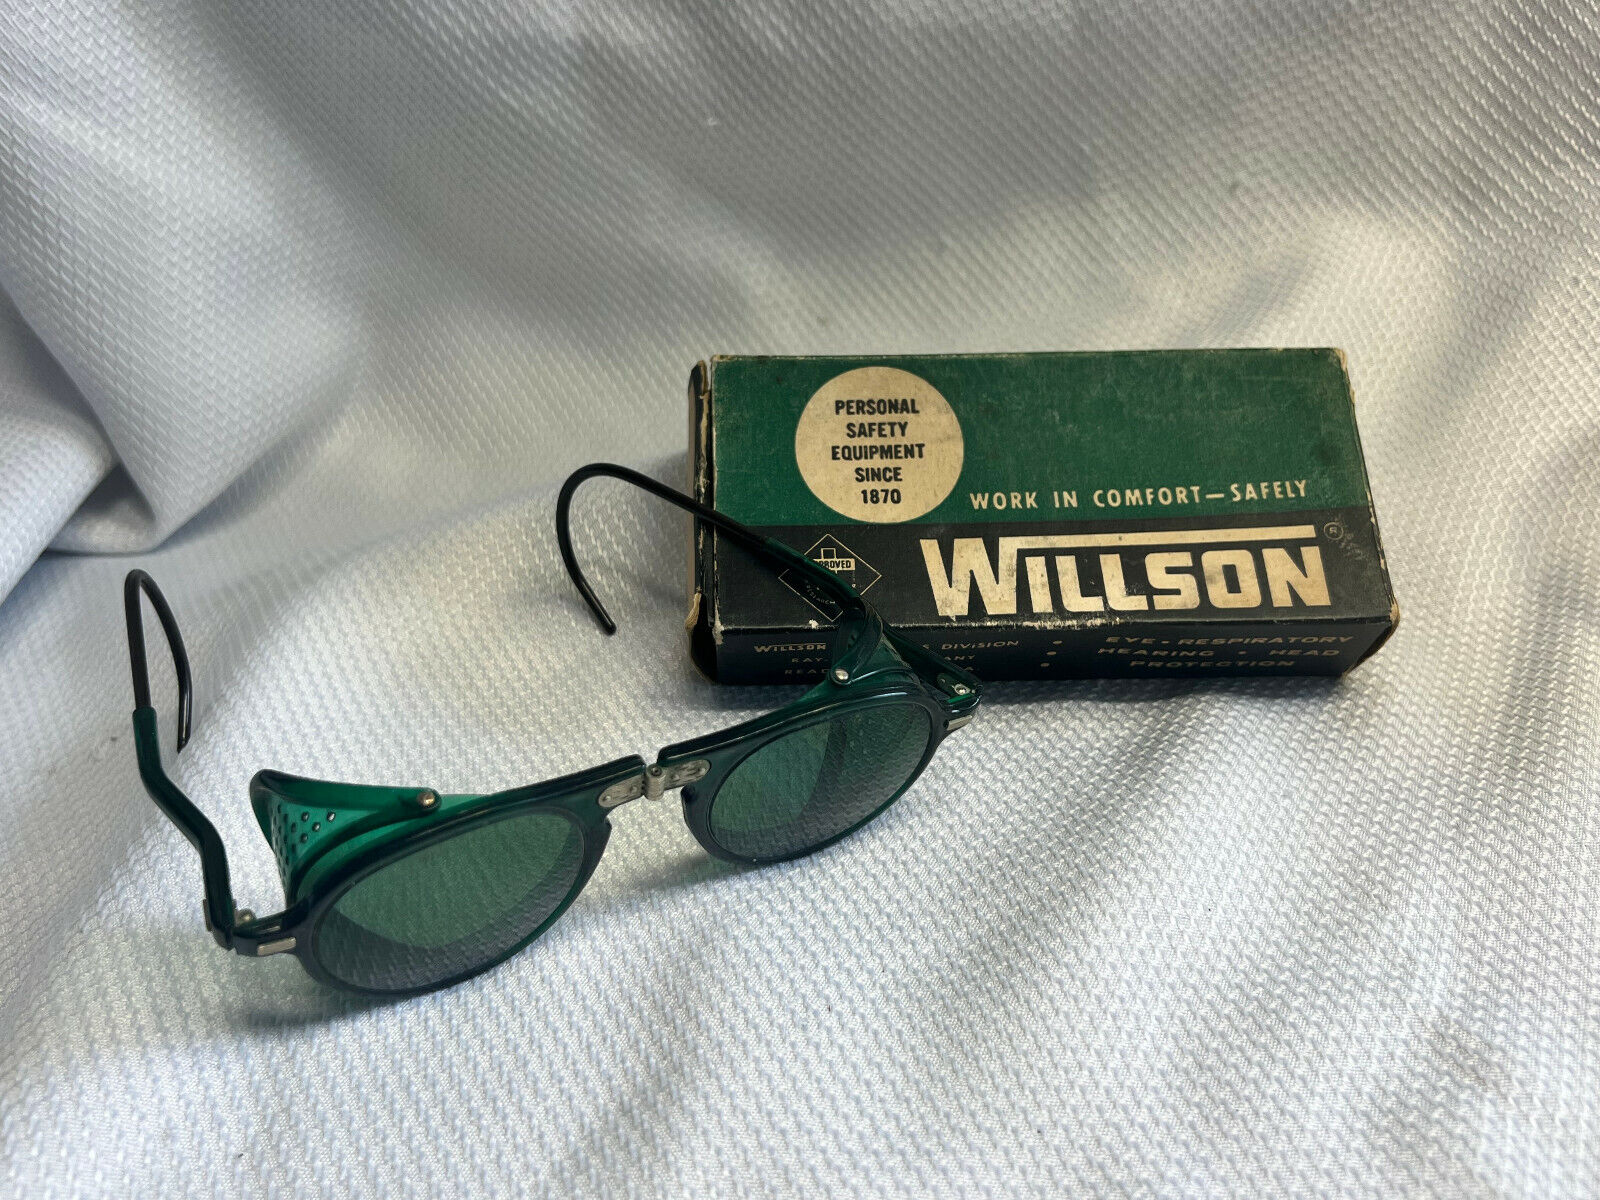 Vtg Willson Products Division Green Folding Safety Glasses In Original Box USA